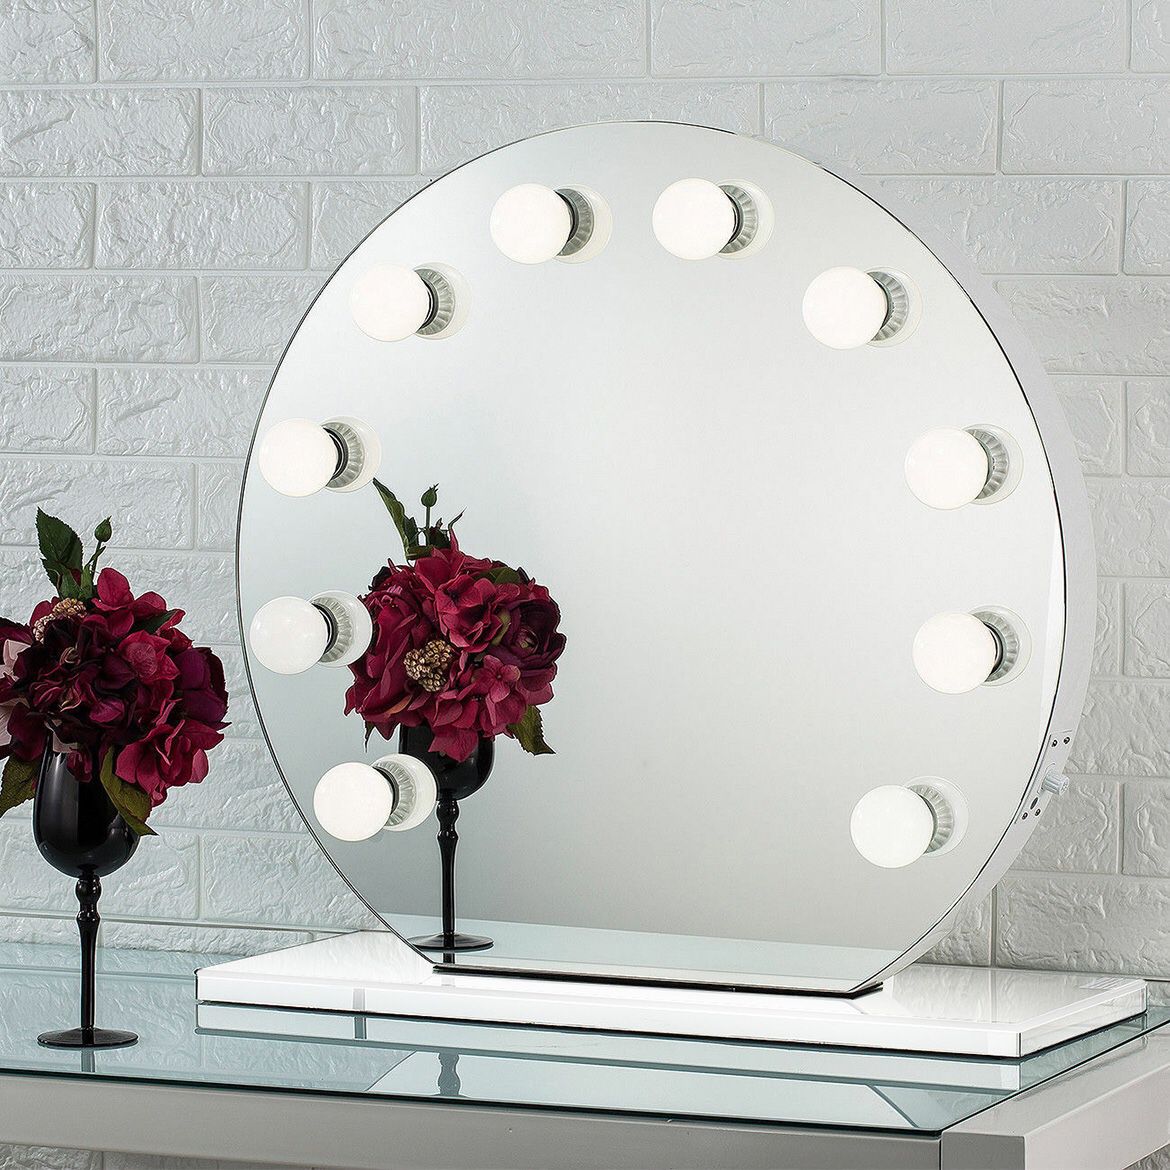 (NEW) $210 Round 28” Vanity Mirror w/ 10 Dimmable LED Light Bulbs, Hollywood Beauty Makeup USB Outlet